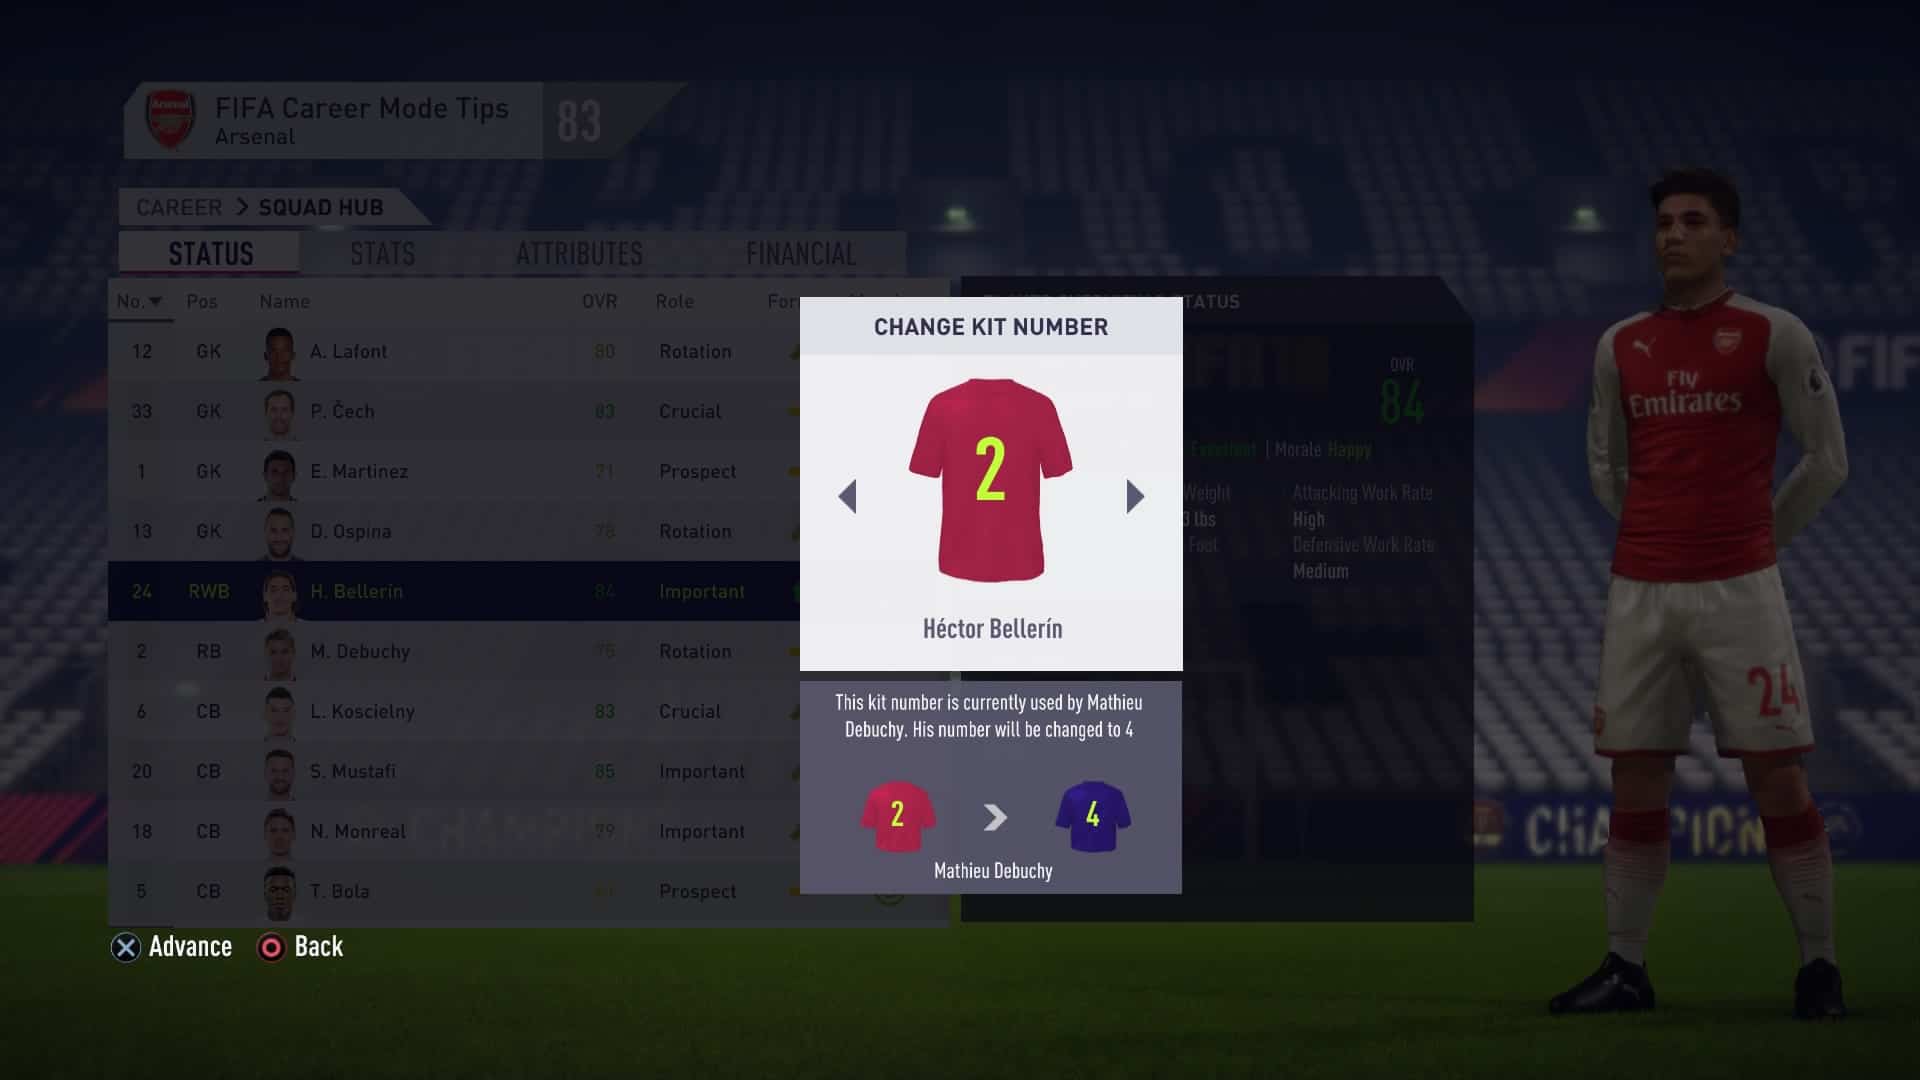 Example showing how to Change Kit Numbers in FIFA 18